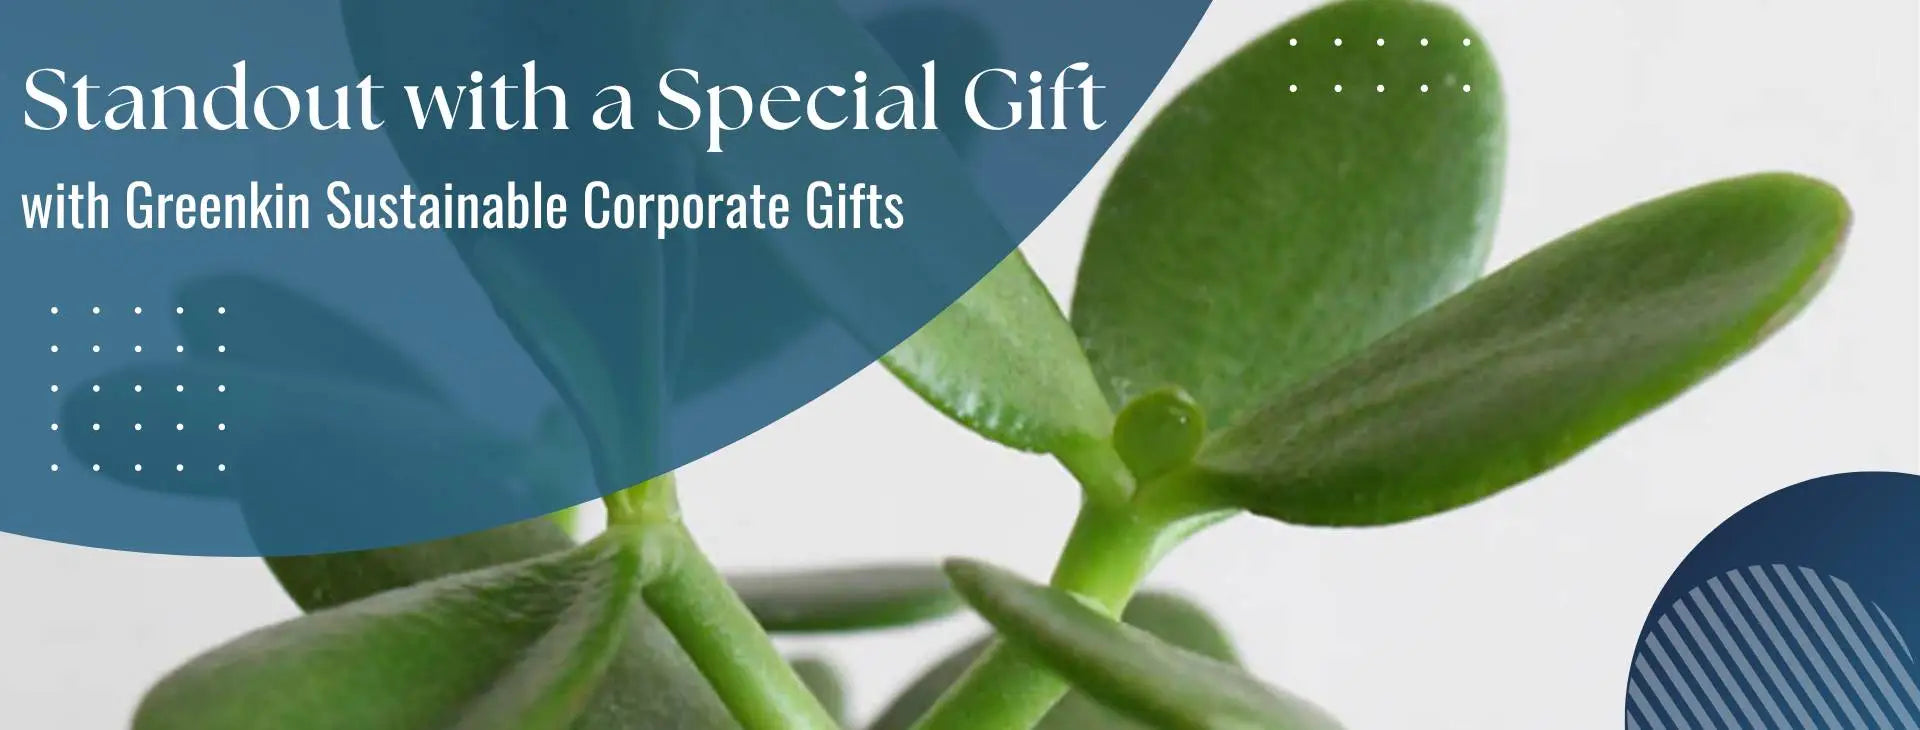 Best Sustainable Corporate Gifts from Greenkin